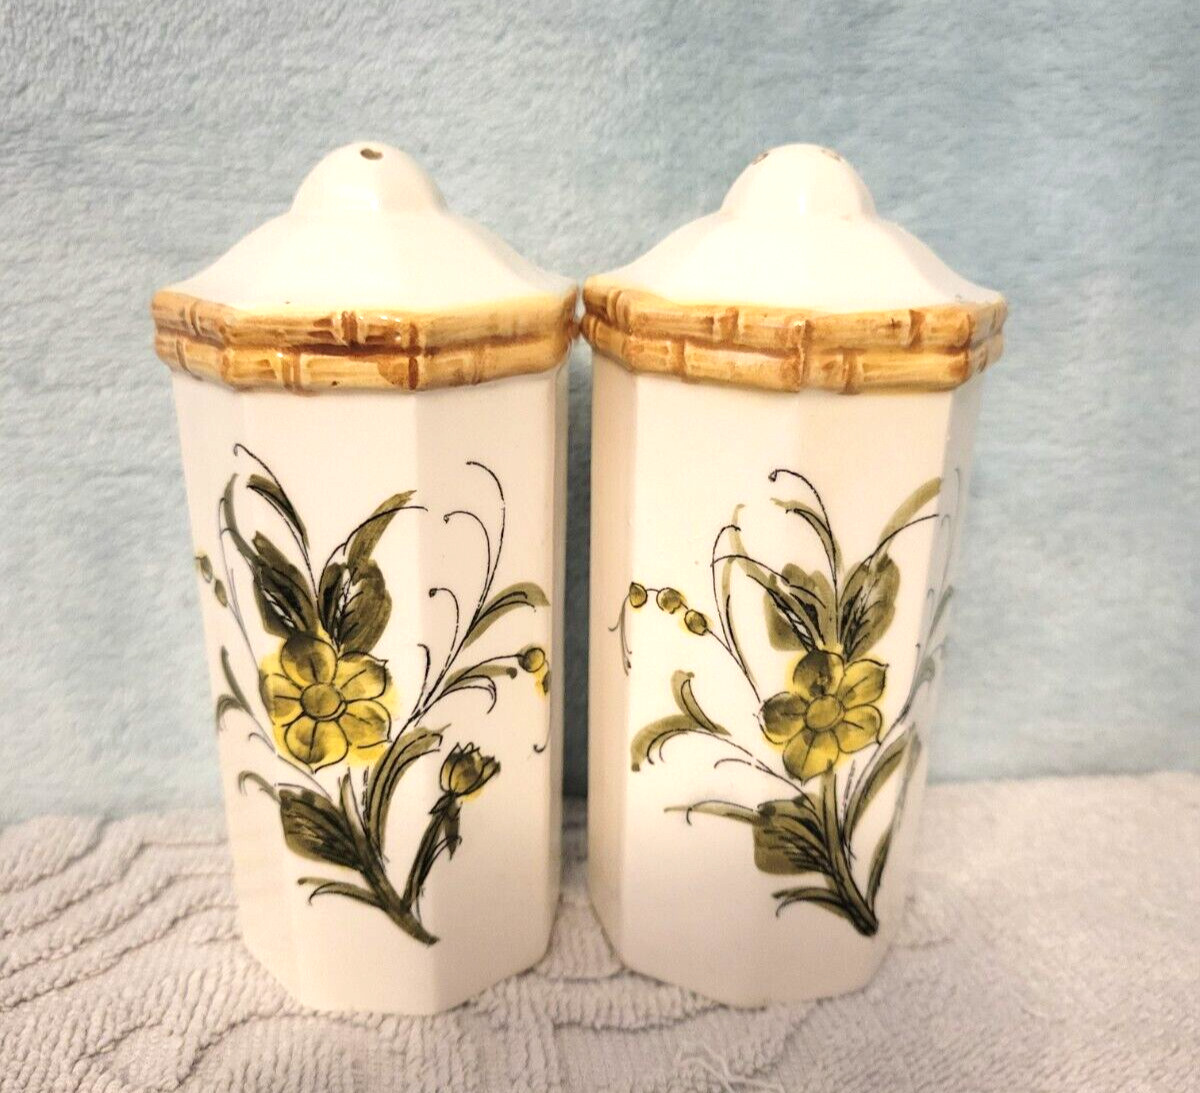 Porcelain/Ceramic Japanese Hand Painted Floral Salt and Pepper Shakers